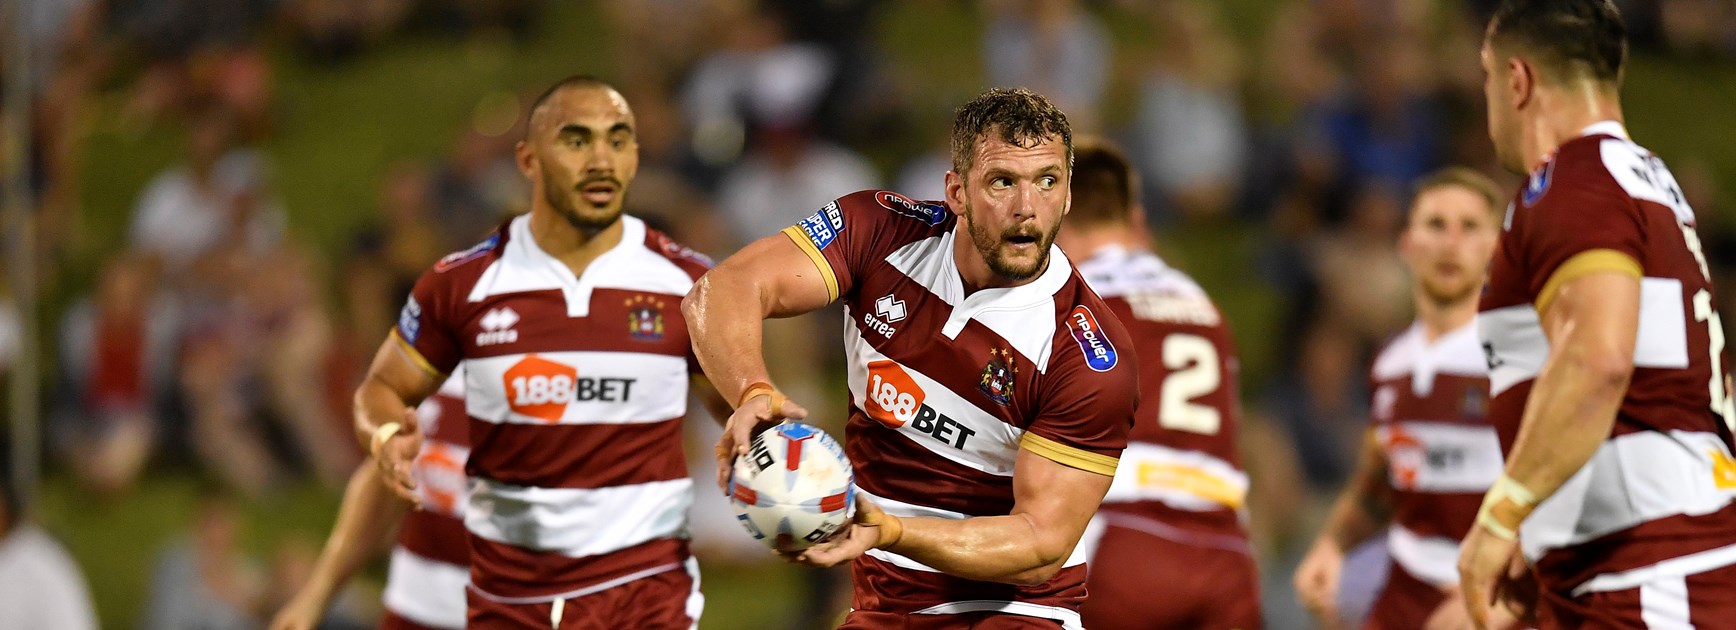 Wigan win Super League match over Hull in Wollongong